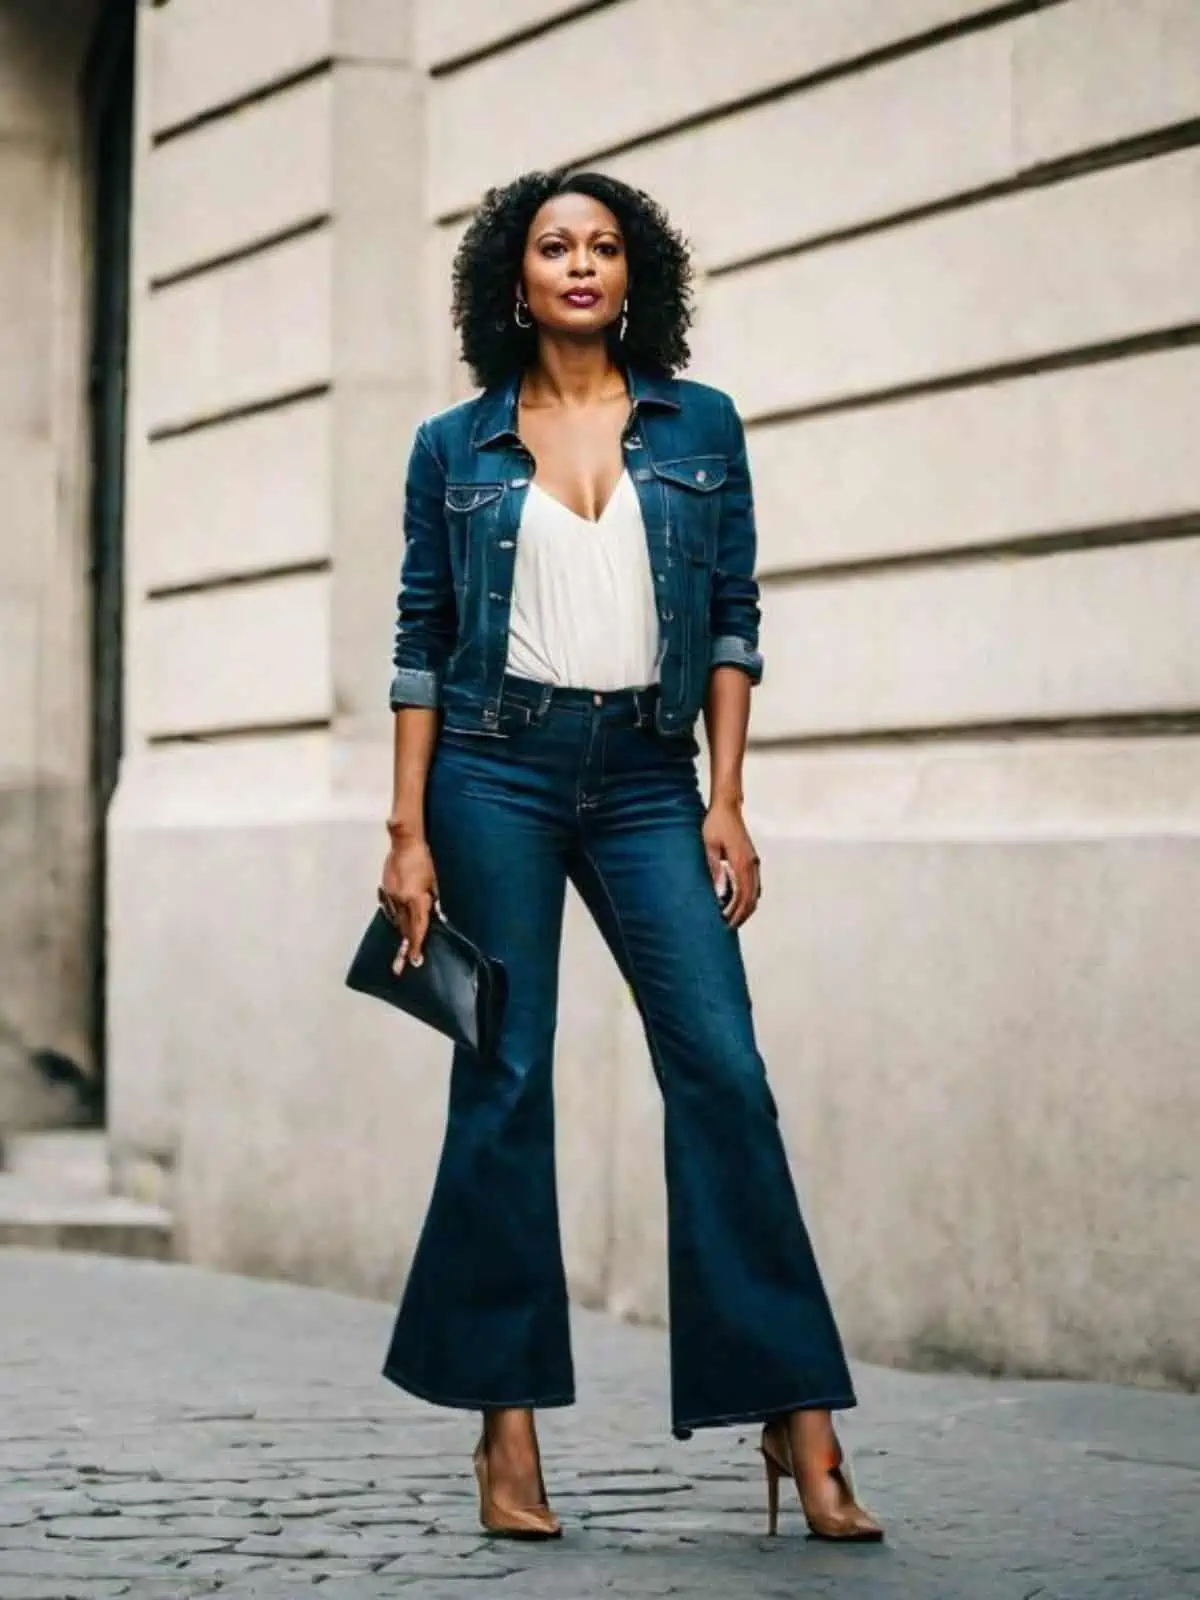 How to wear bootcut jeans: the only guide you'll need - Lookiero Blog